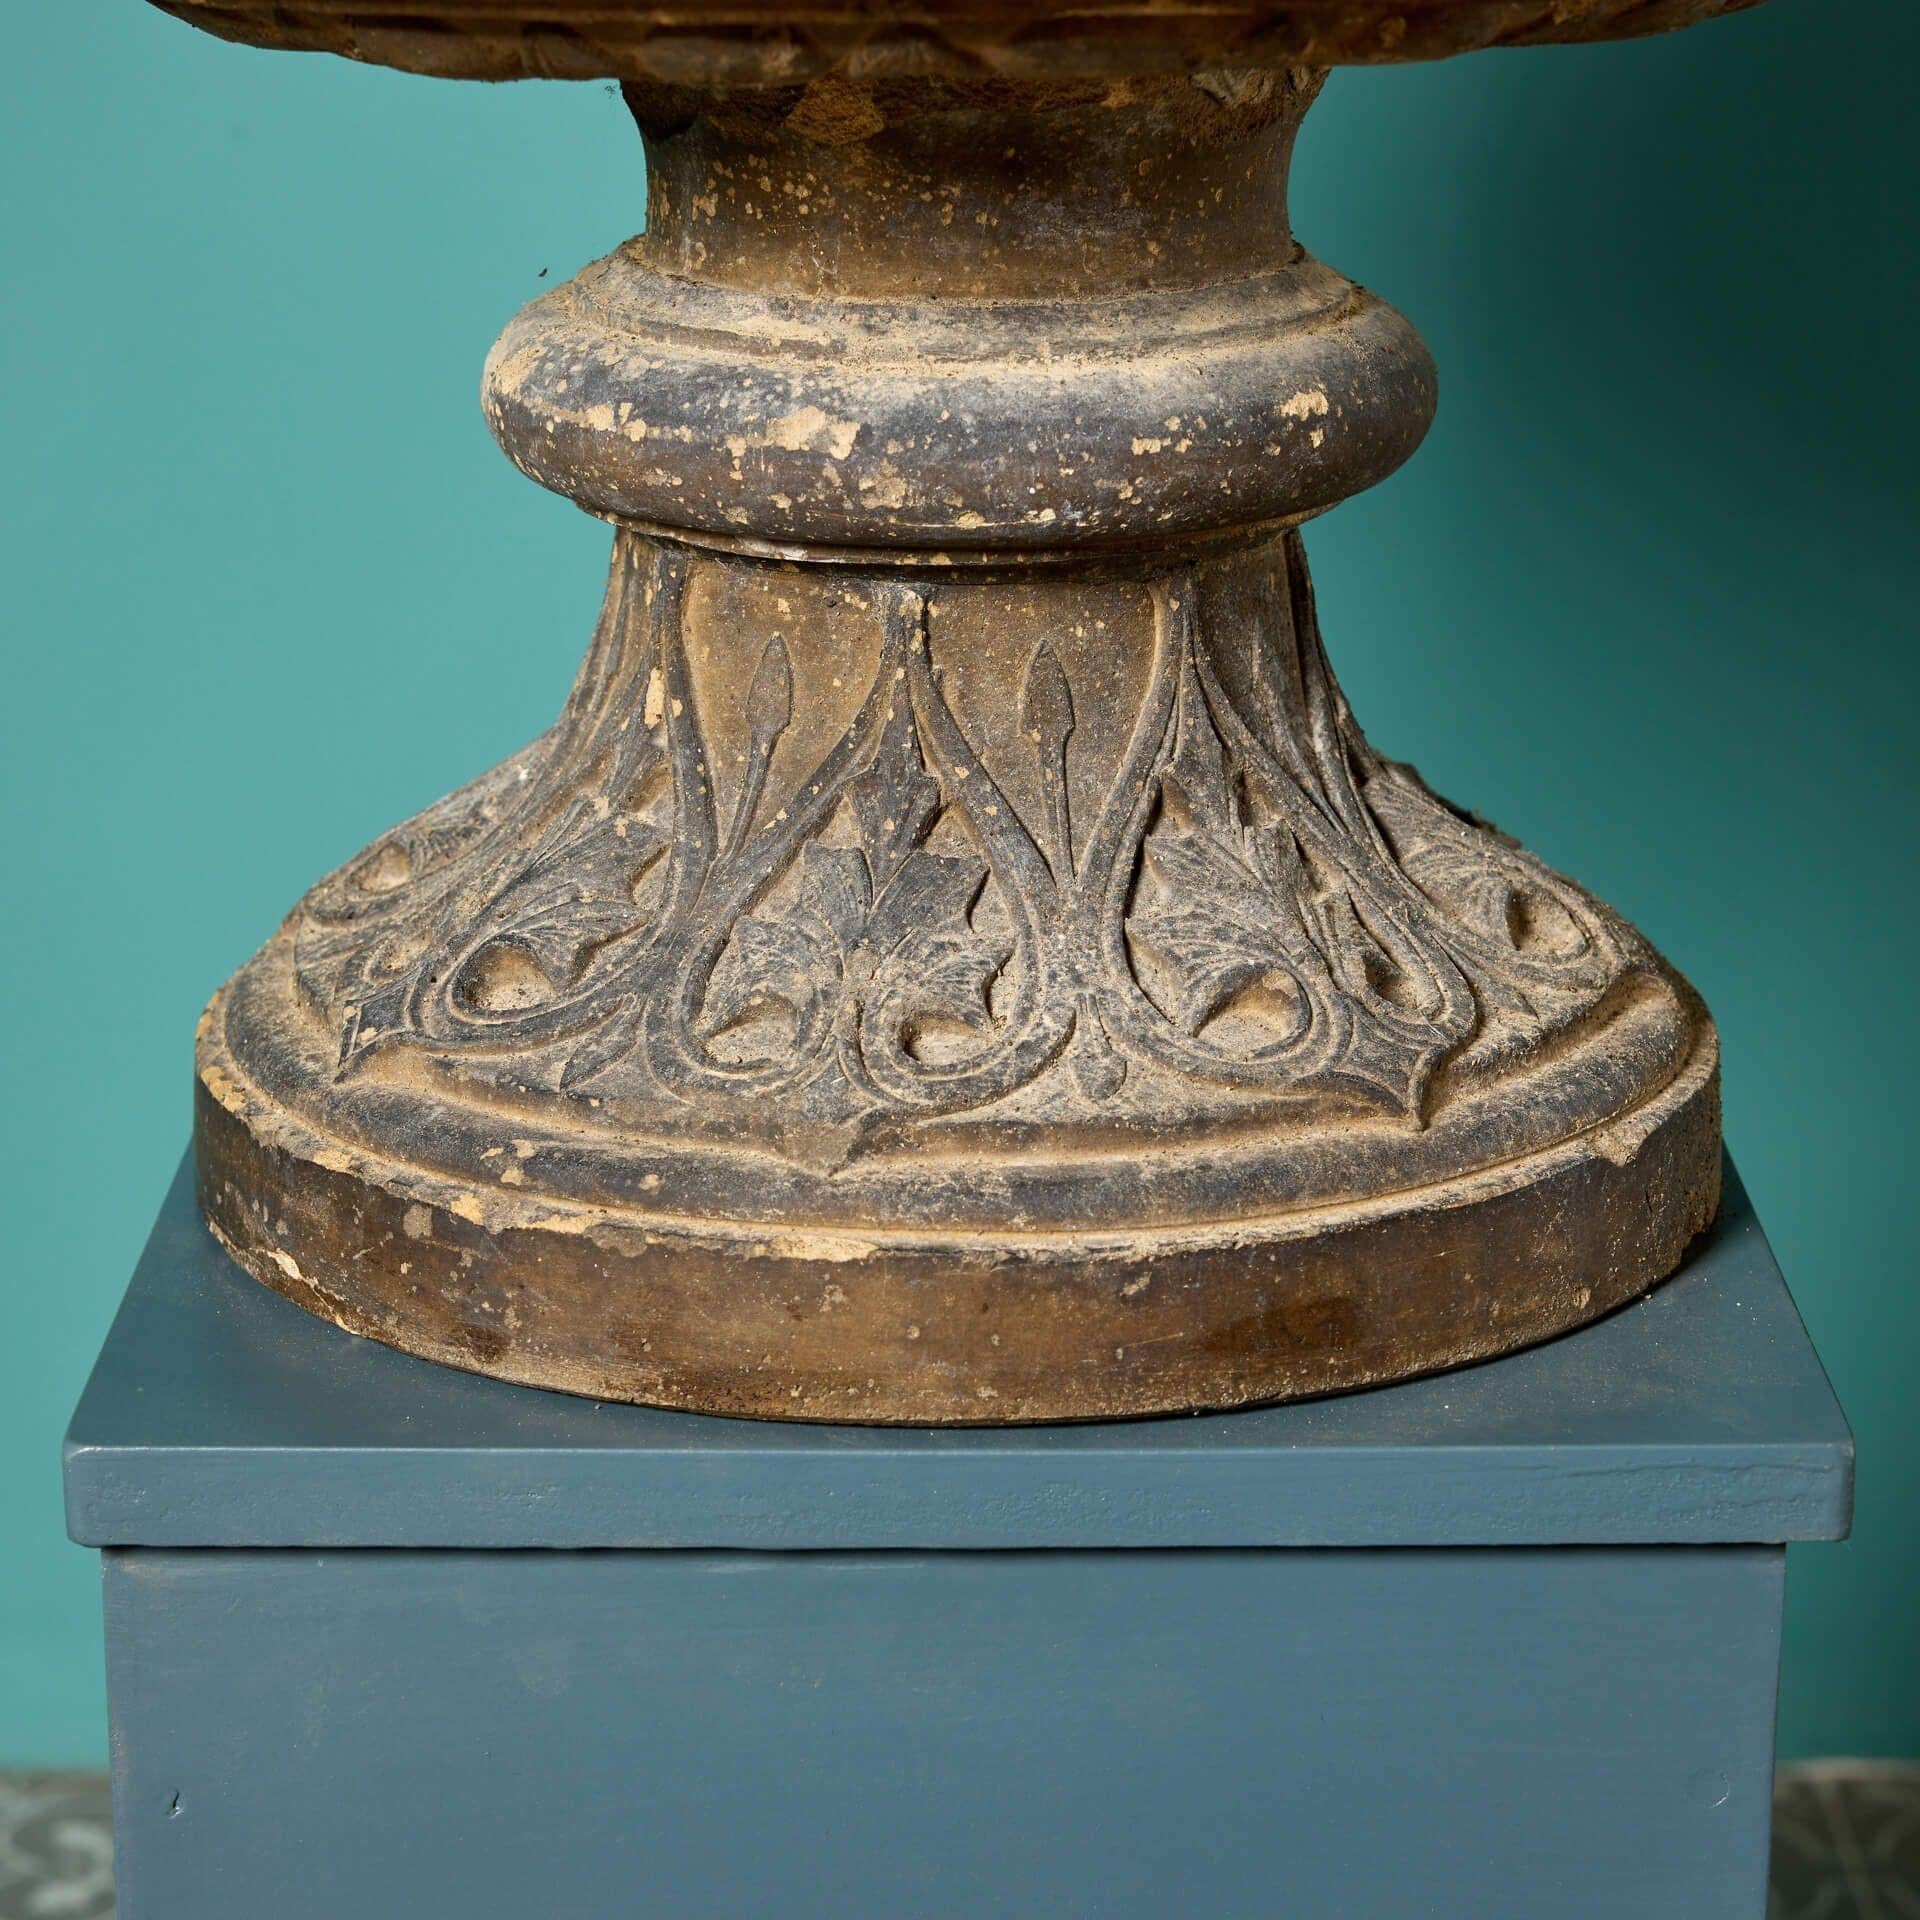 Large Buff Terracotta Antique Centrepiece Urn In Fair Condition For Sale In Wormelow, Herefordshire